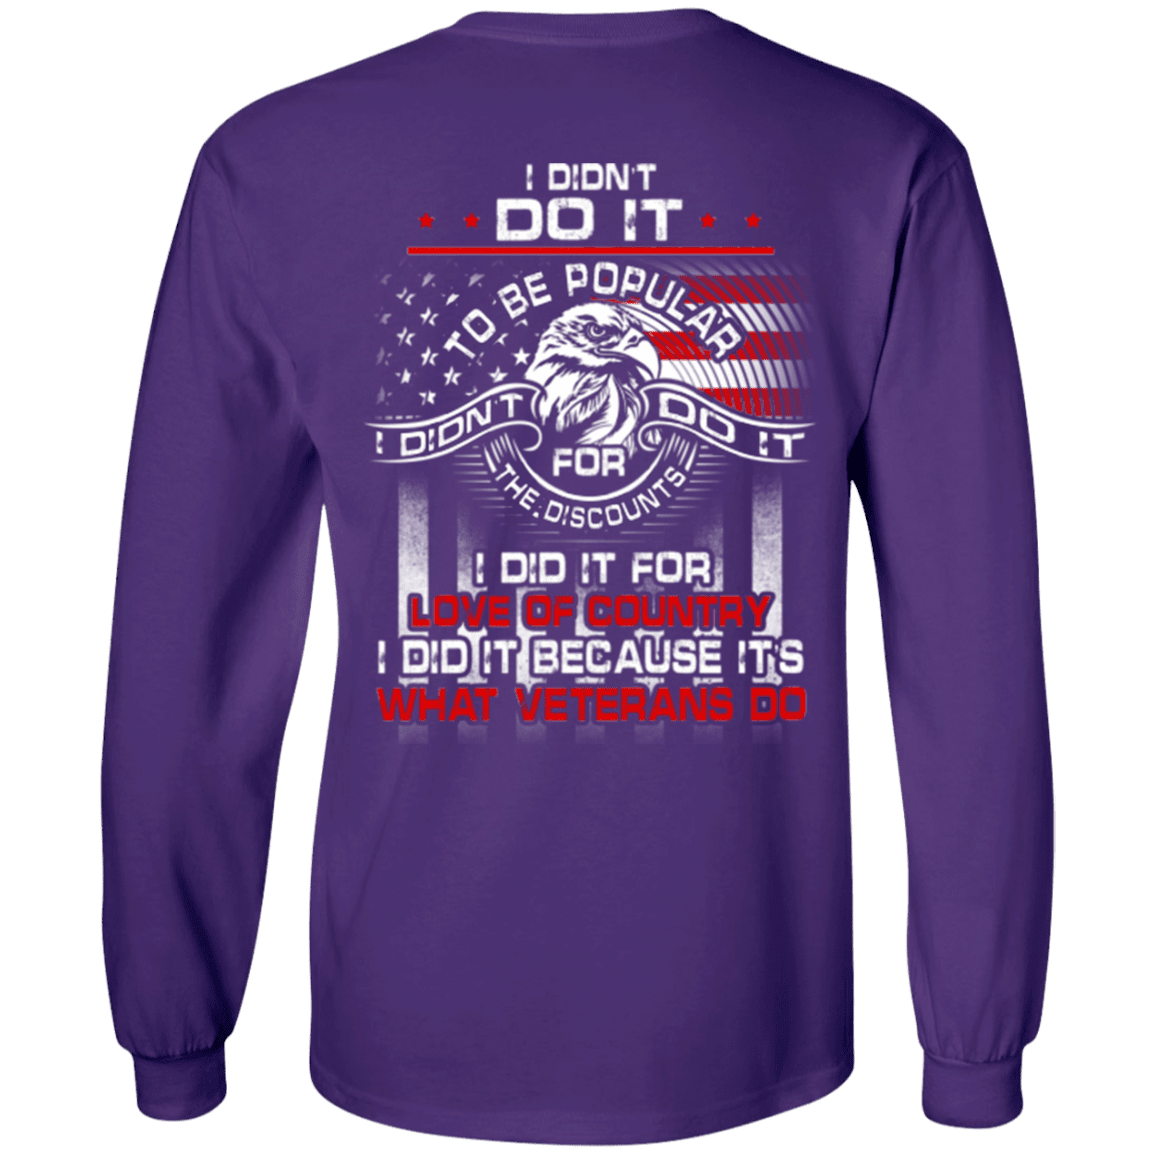 Military T-Shirt "I Did It Because It's What Veterans Do"-TShirt-General-Veterans Nation